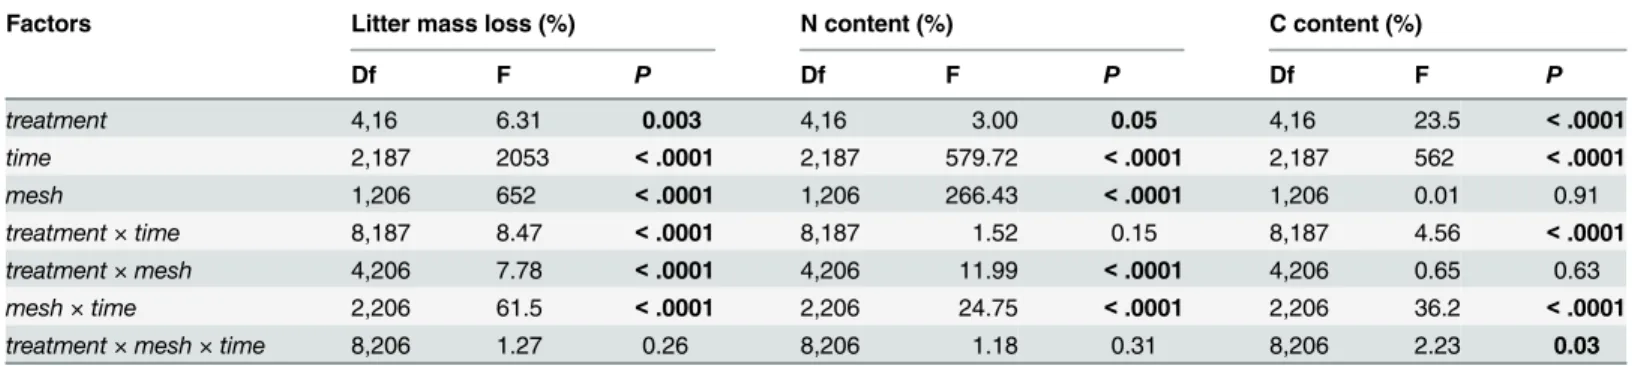 Table 1. The effects of ‘ treatment ’ , ‘ time ’ and ‘ mesh ’ and their interactions on litter mass loss of rice straw and the N and C contents of the retrieved straw using a GLMM type III sum of squares